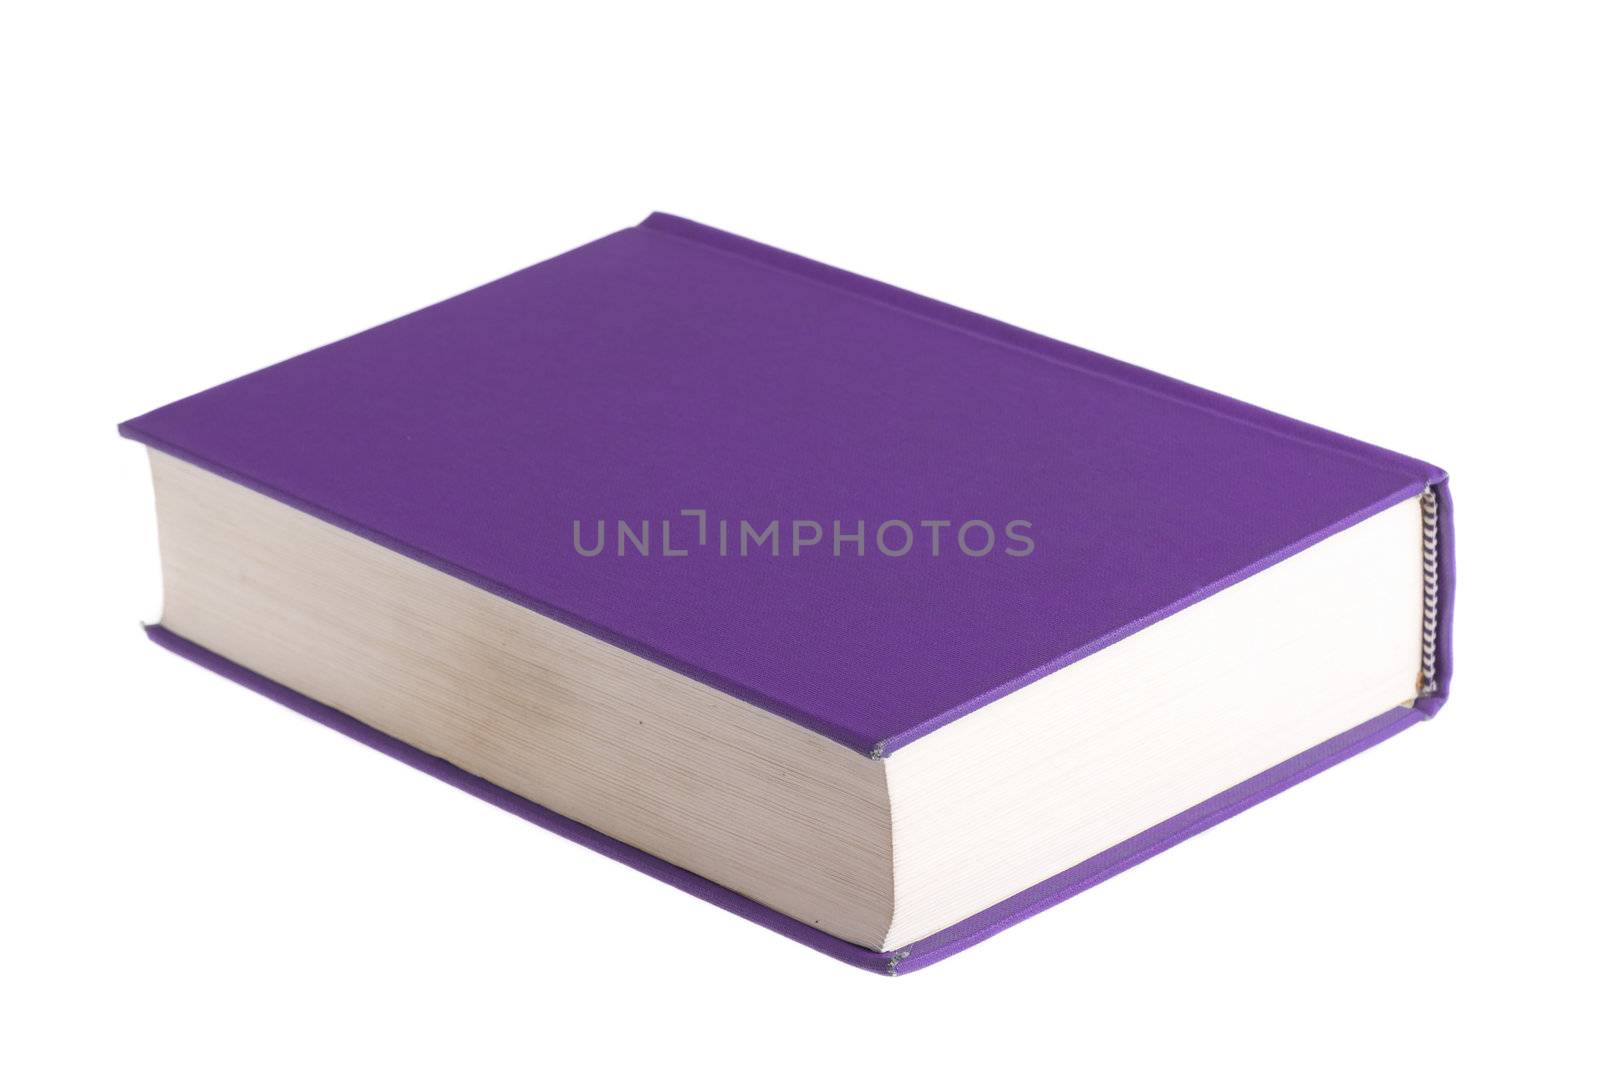 Blue book isolated on white background